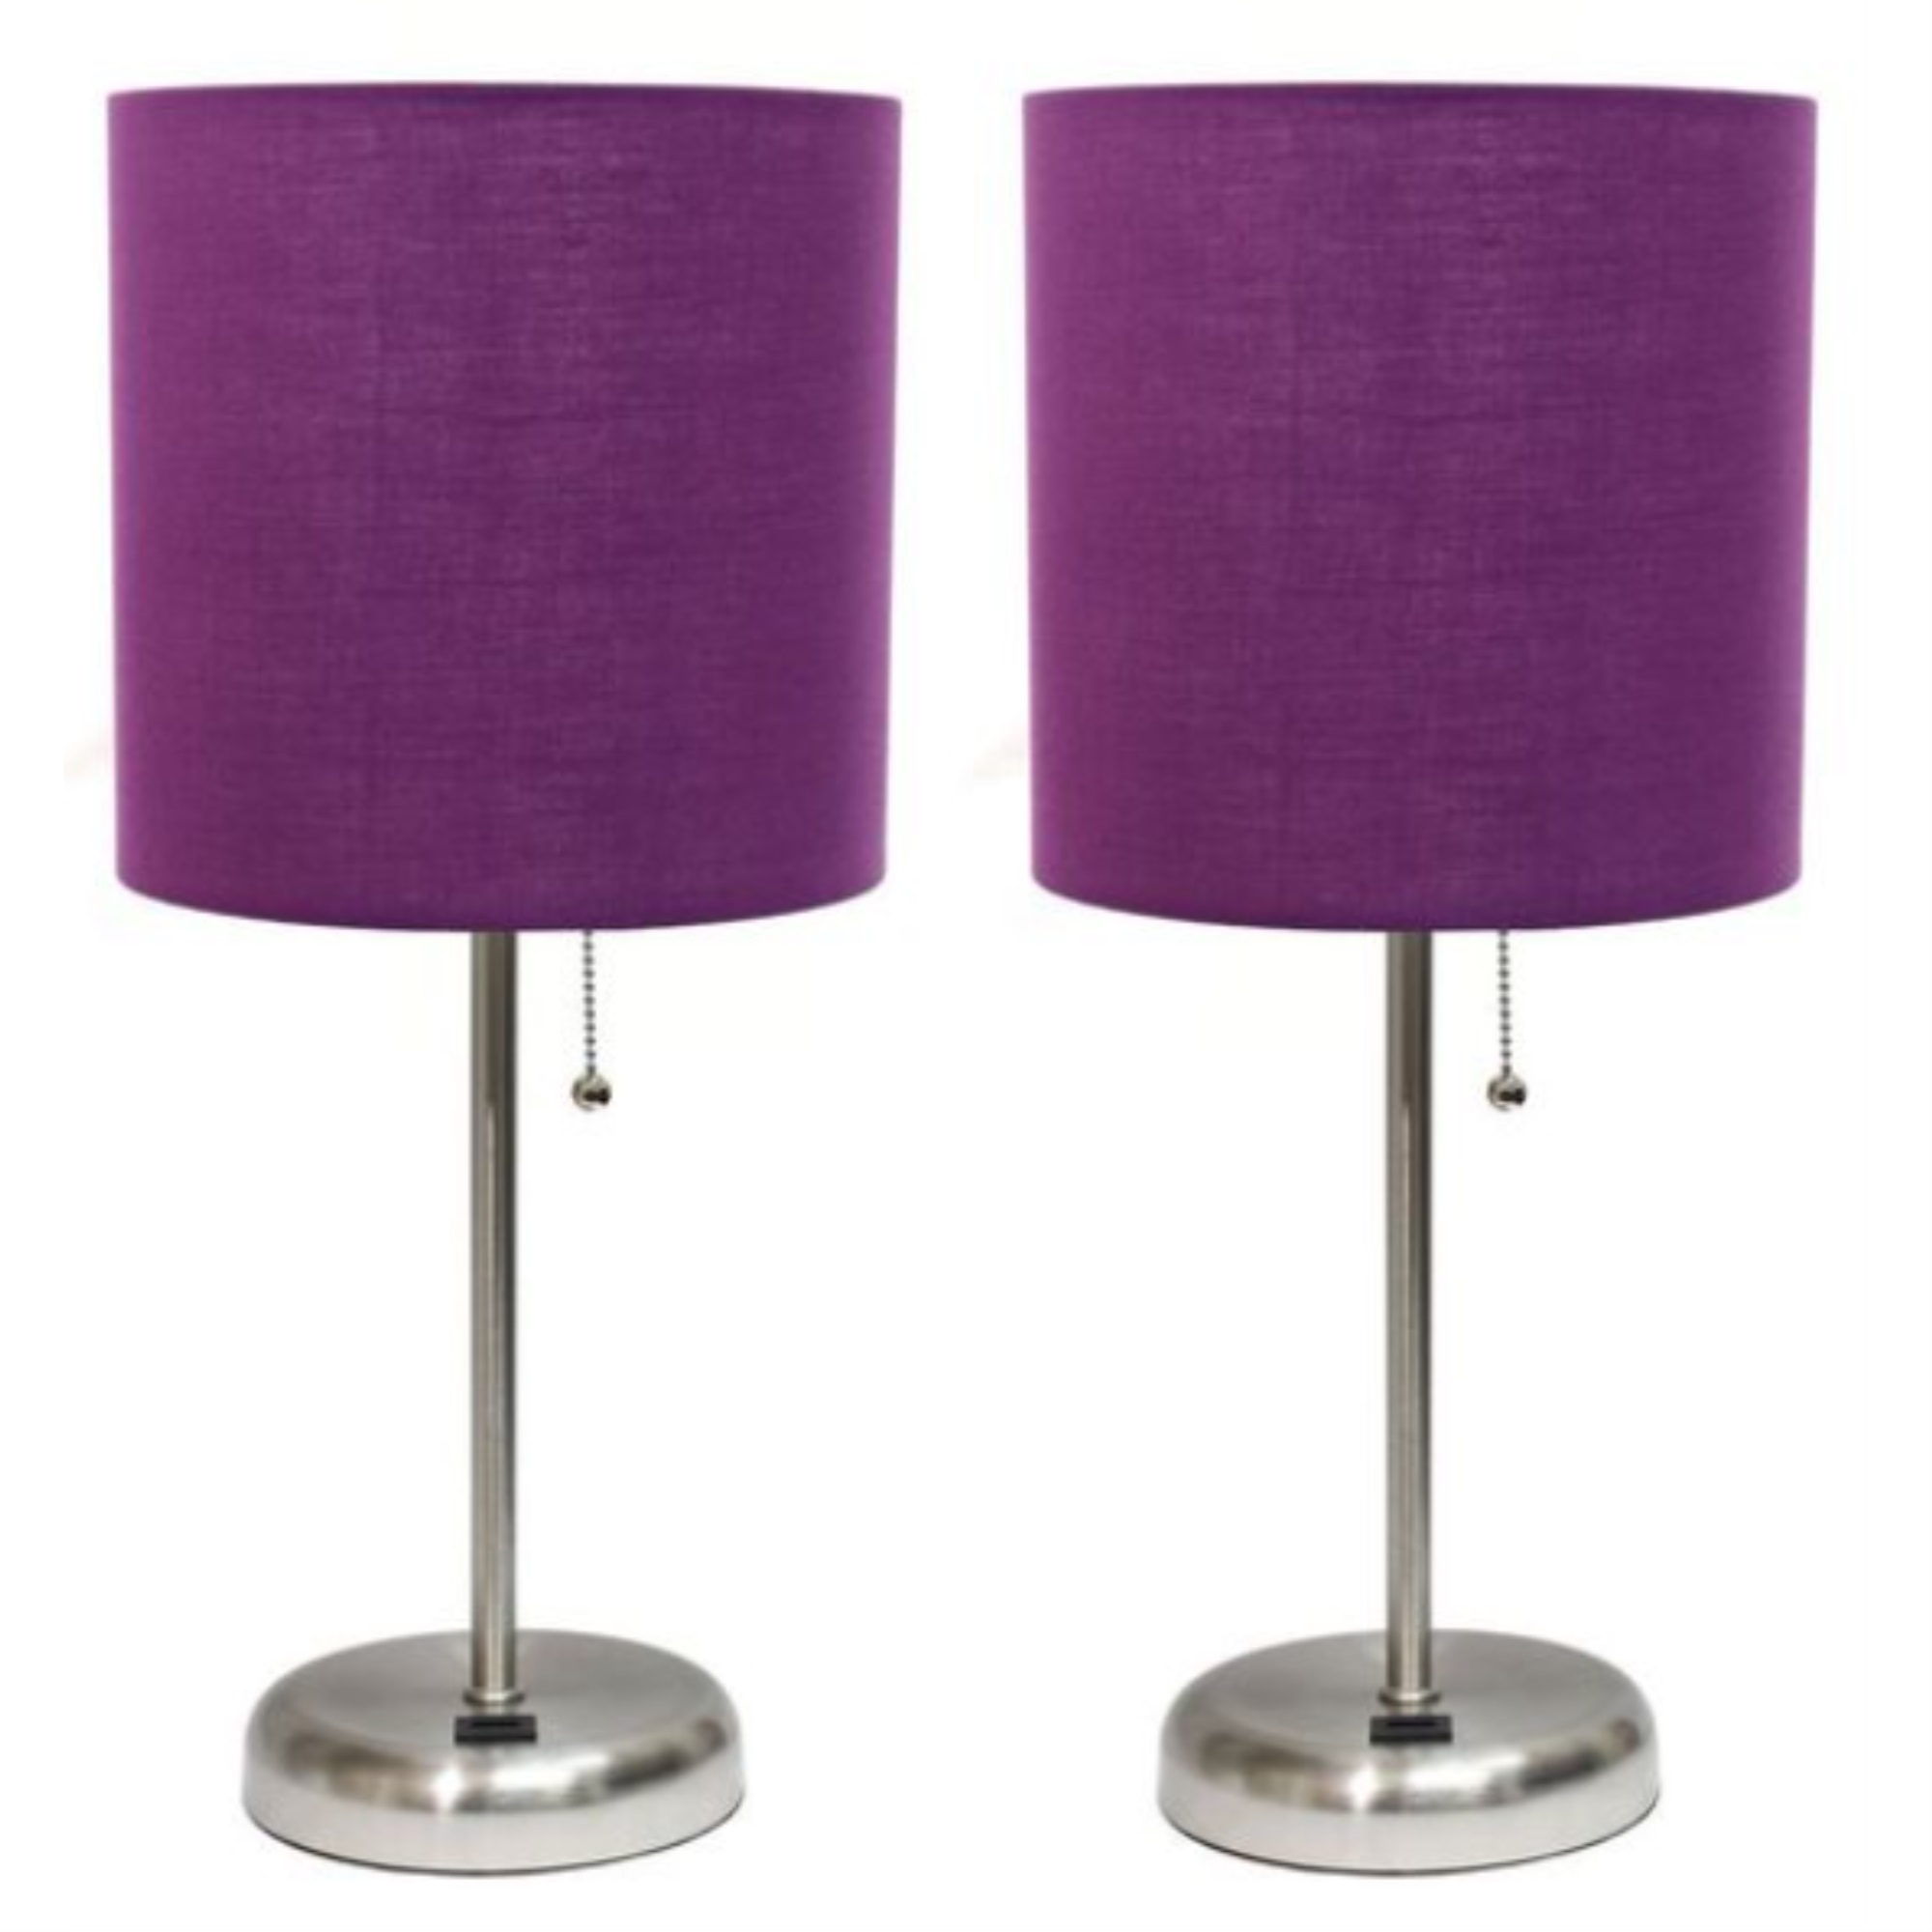 LimeLights Stick Lamp with USB charging port and Fabric Shade 2 Pack Set, Purple